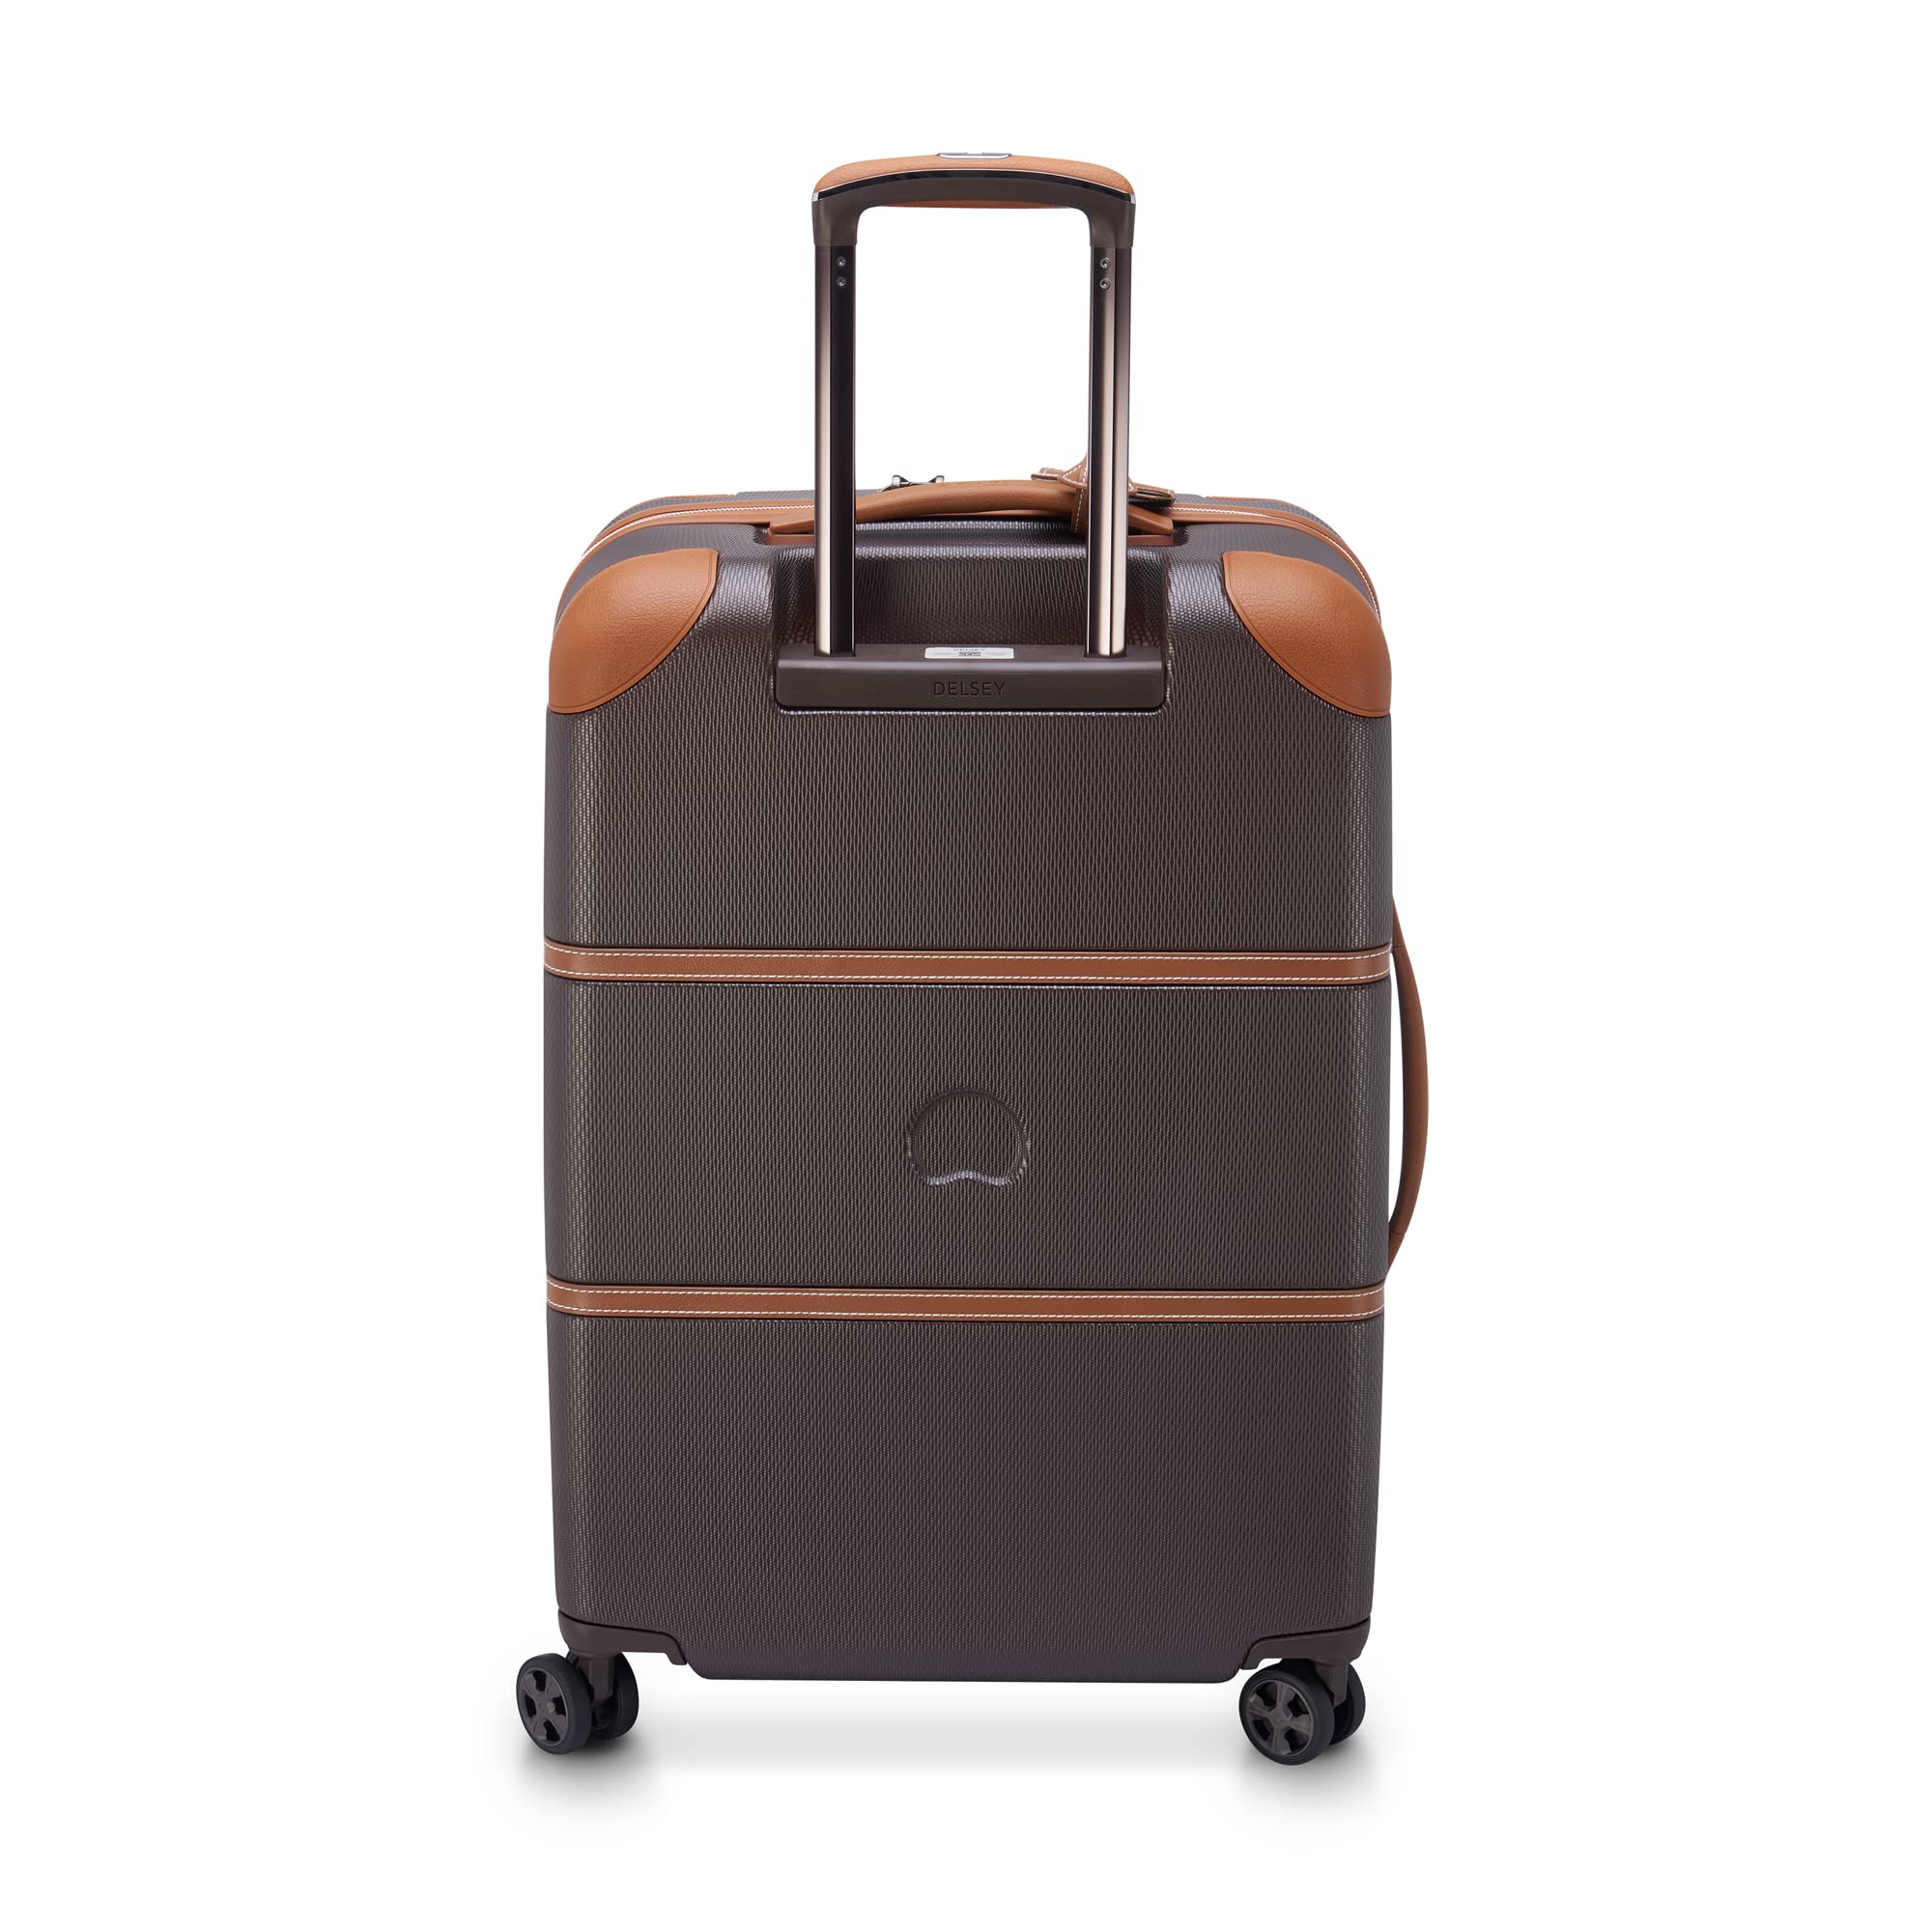 DELSEY Paris Chatelet Hardside 2.0 Luggage with Spinner Wheels, Chocolate Brown, Checked-Medium 24 Inch